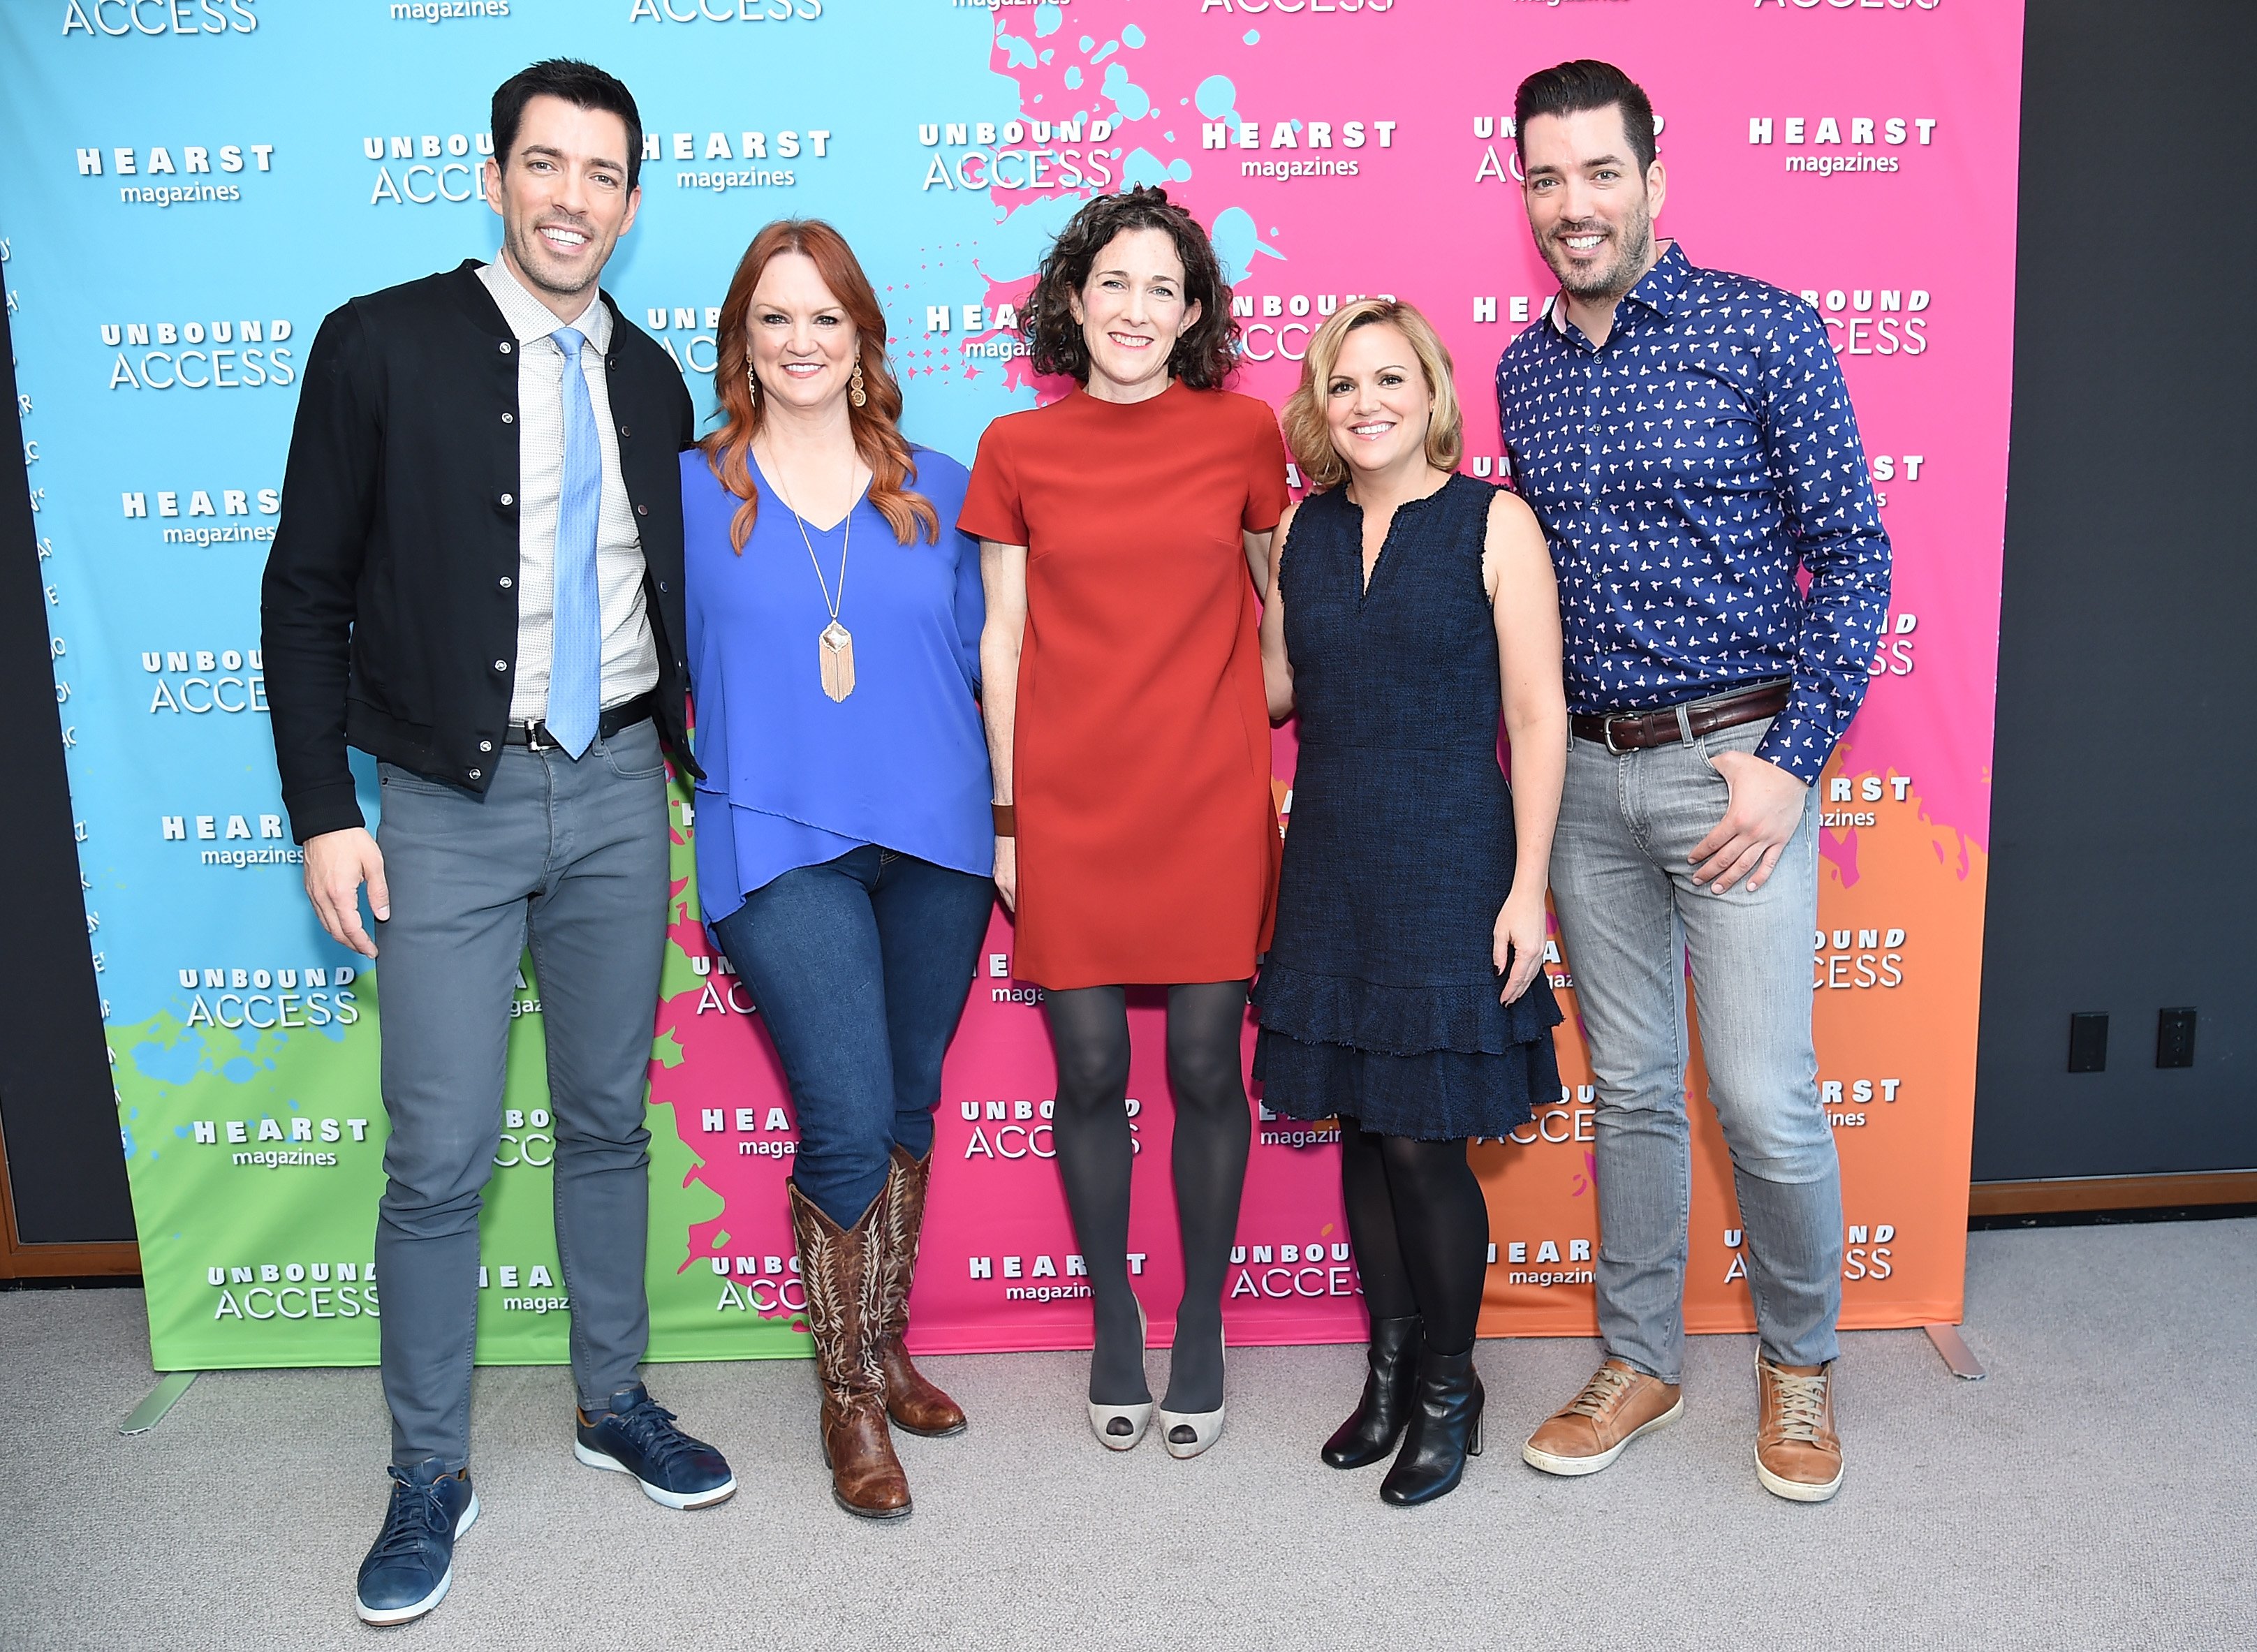 Ree Drummond poses with The Property Brothers and others at a Pioneer Woman event.  